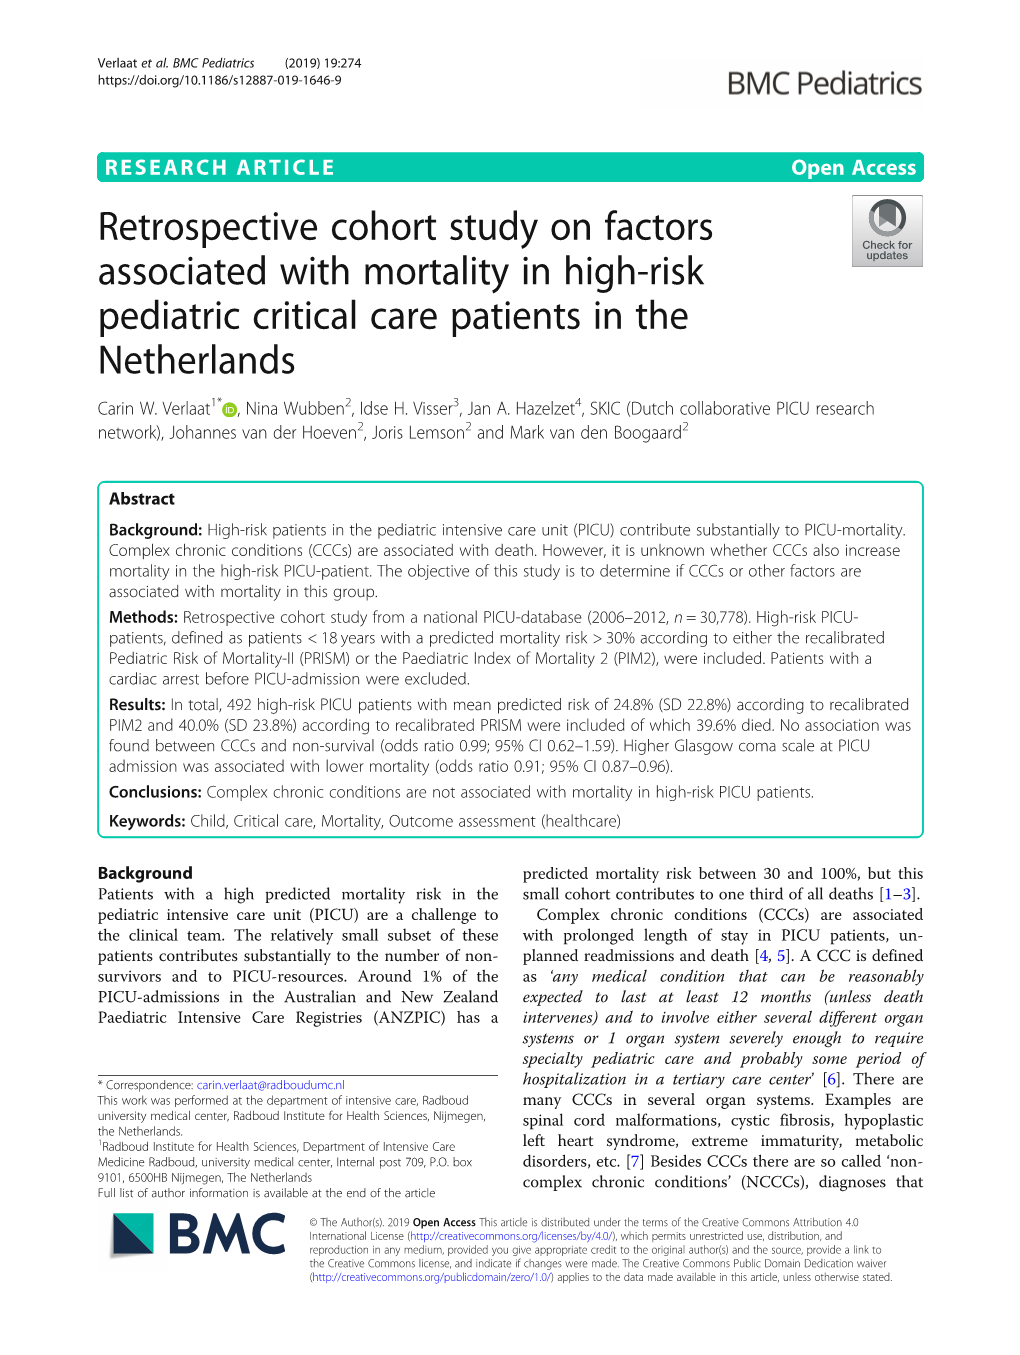 Retrospective Cohort Study on Factors Associated with Mortality in High-Risk Pediatric Critical Care Patients in the Netherlands Carin W